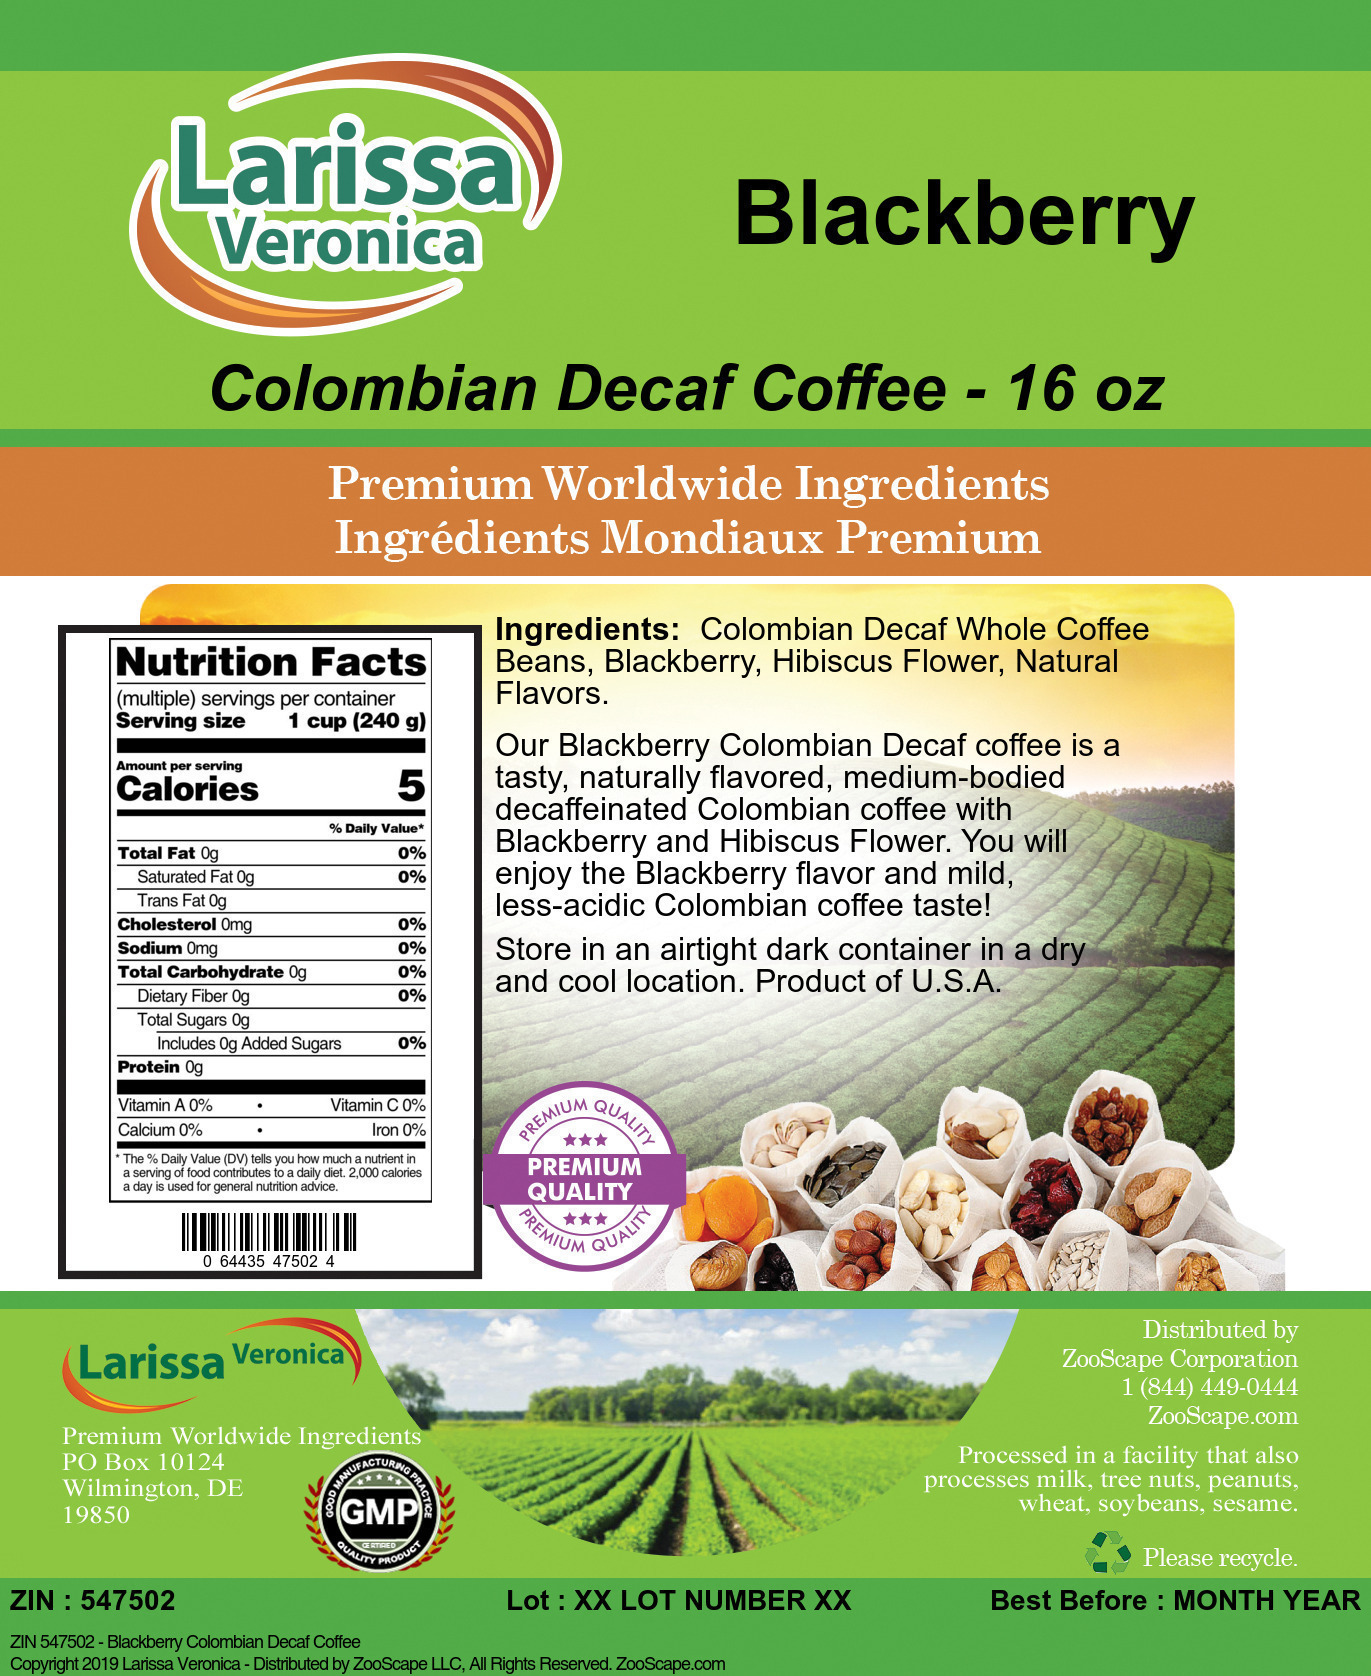 Blackberry Colombian Decaf Coffee - Label